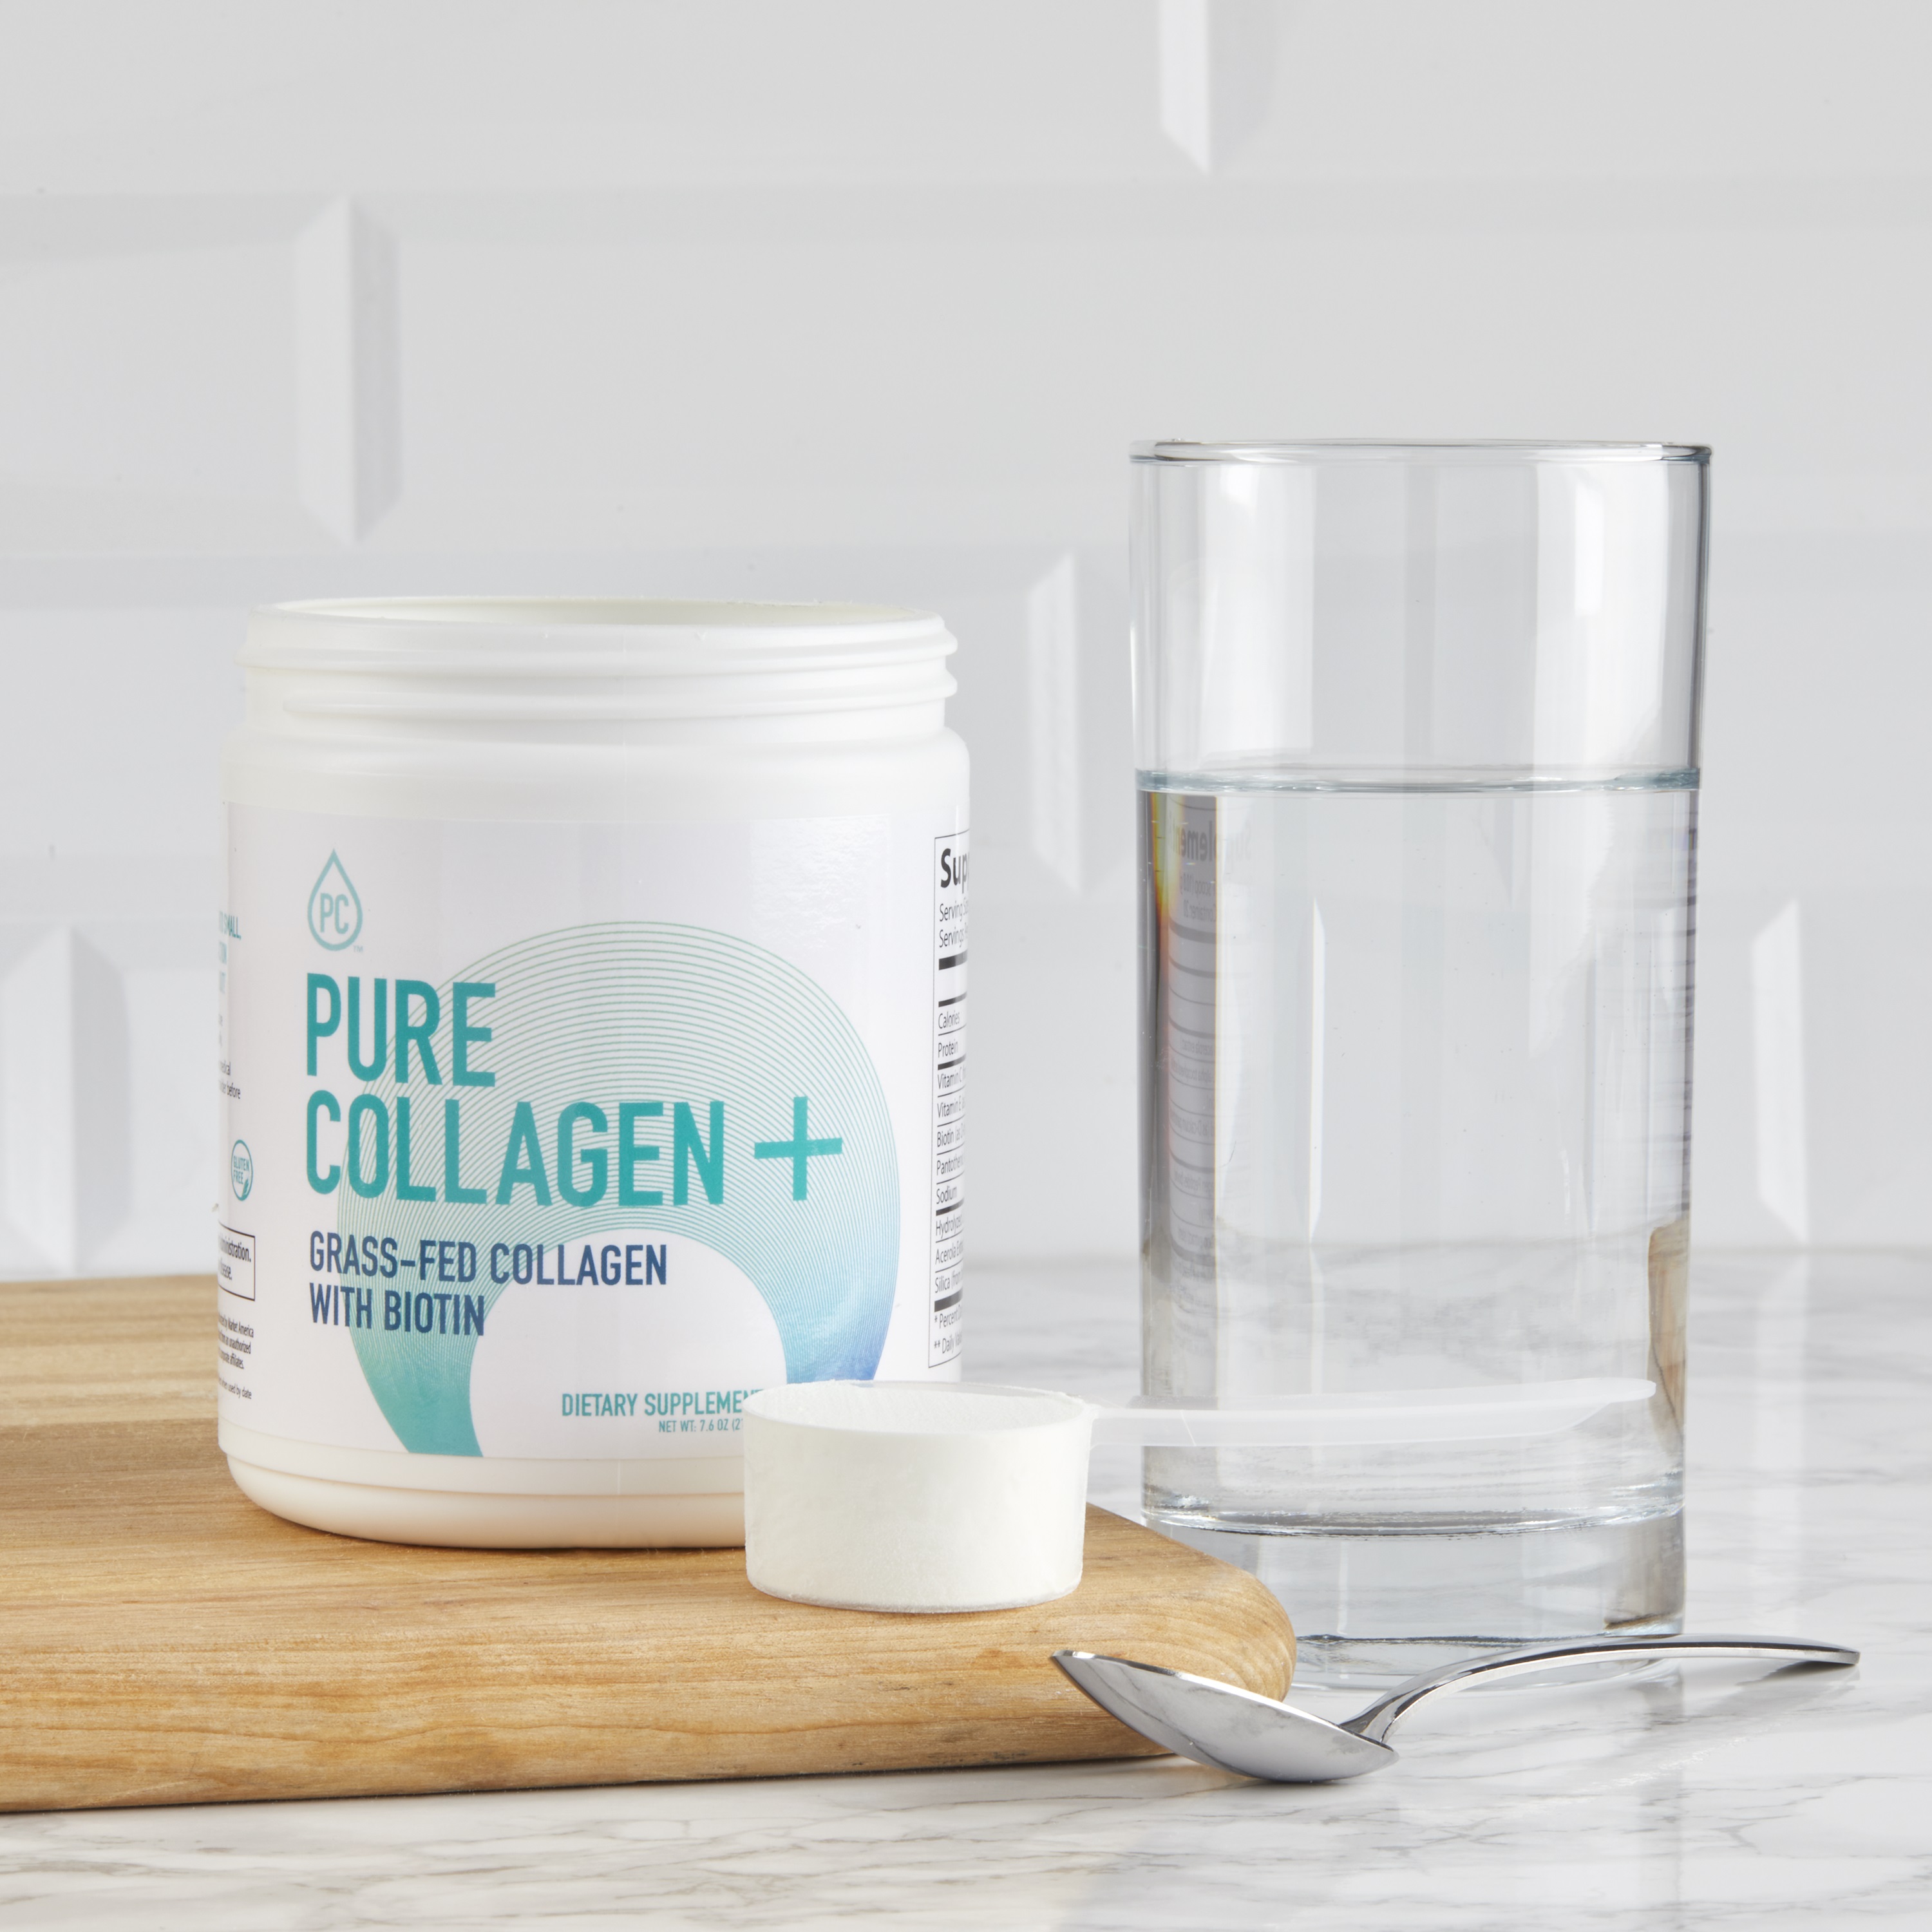 Primary Benefits* of Pure Collagen+